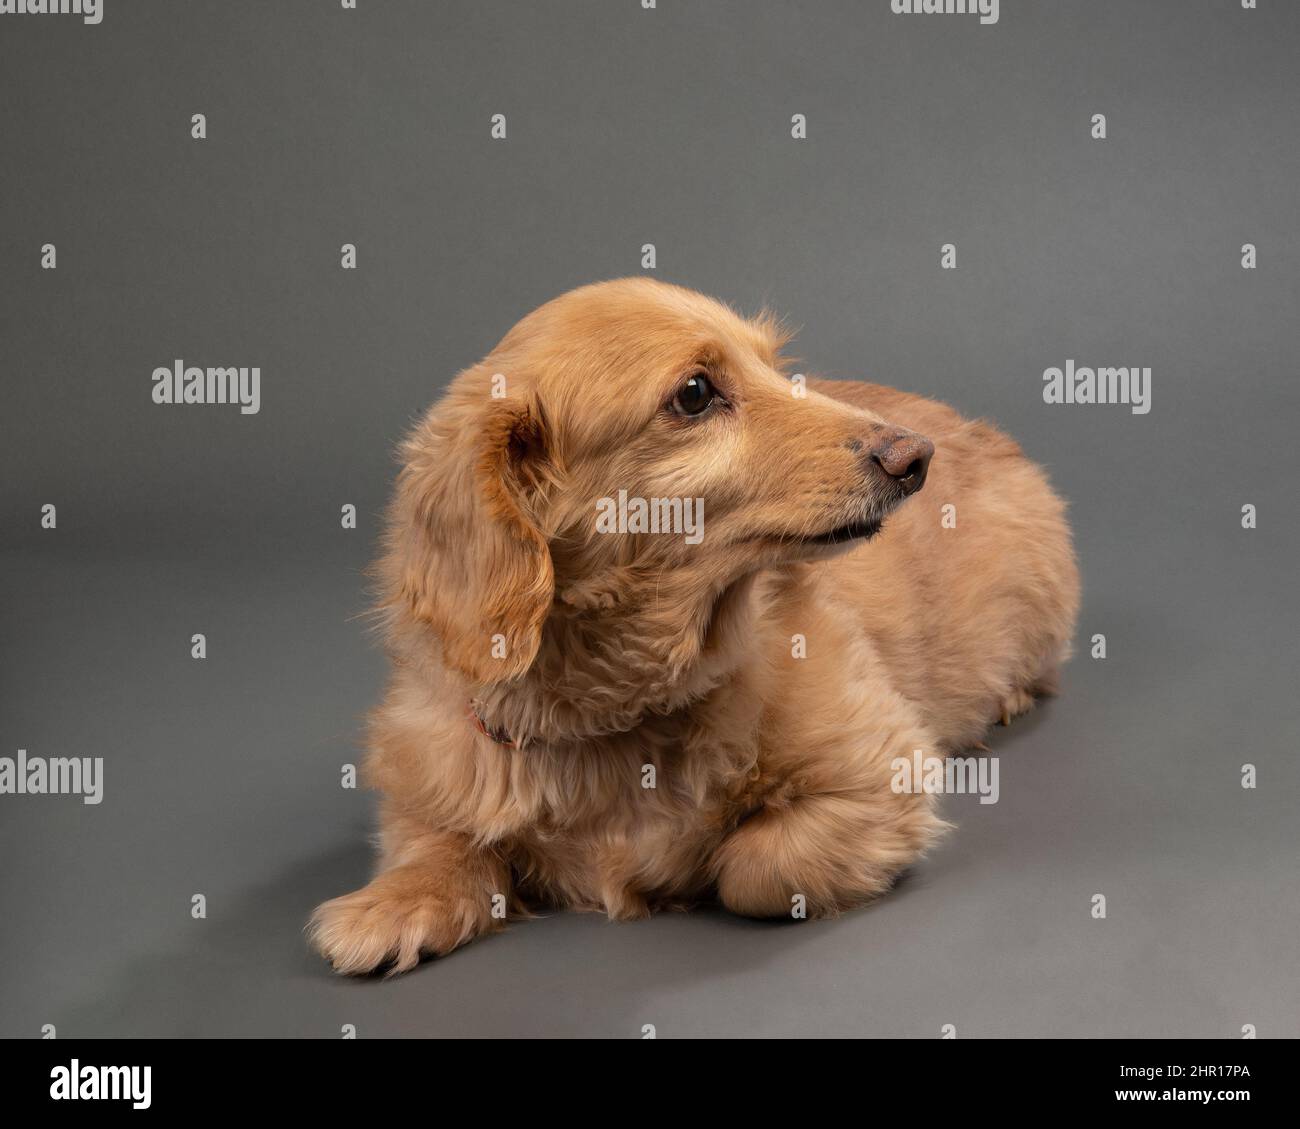 Horizontal shot of a beautiful blond longhaired dachshund on a gray seamless background. Stock Photo